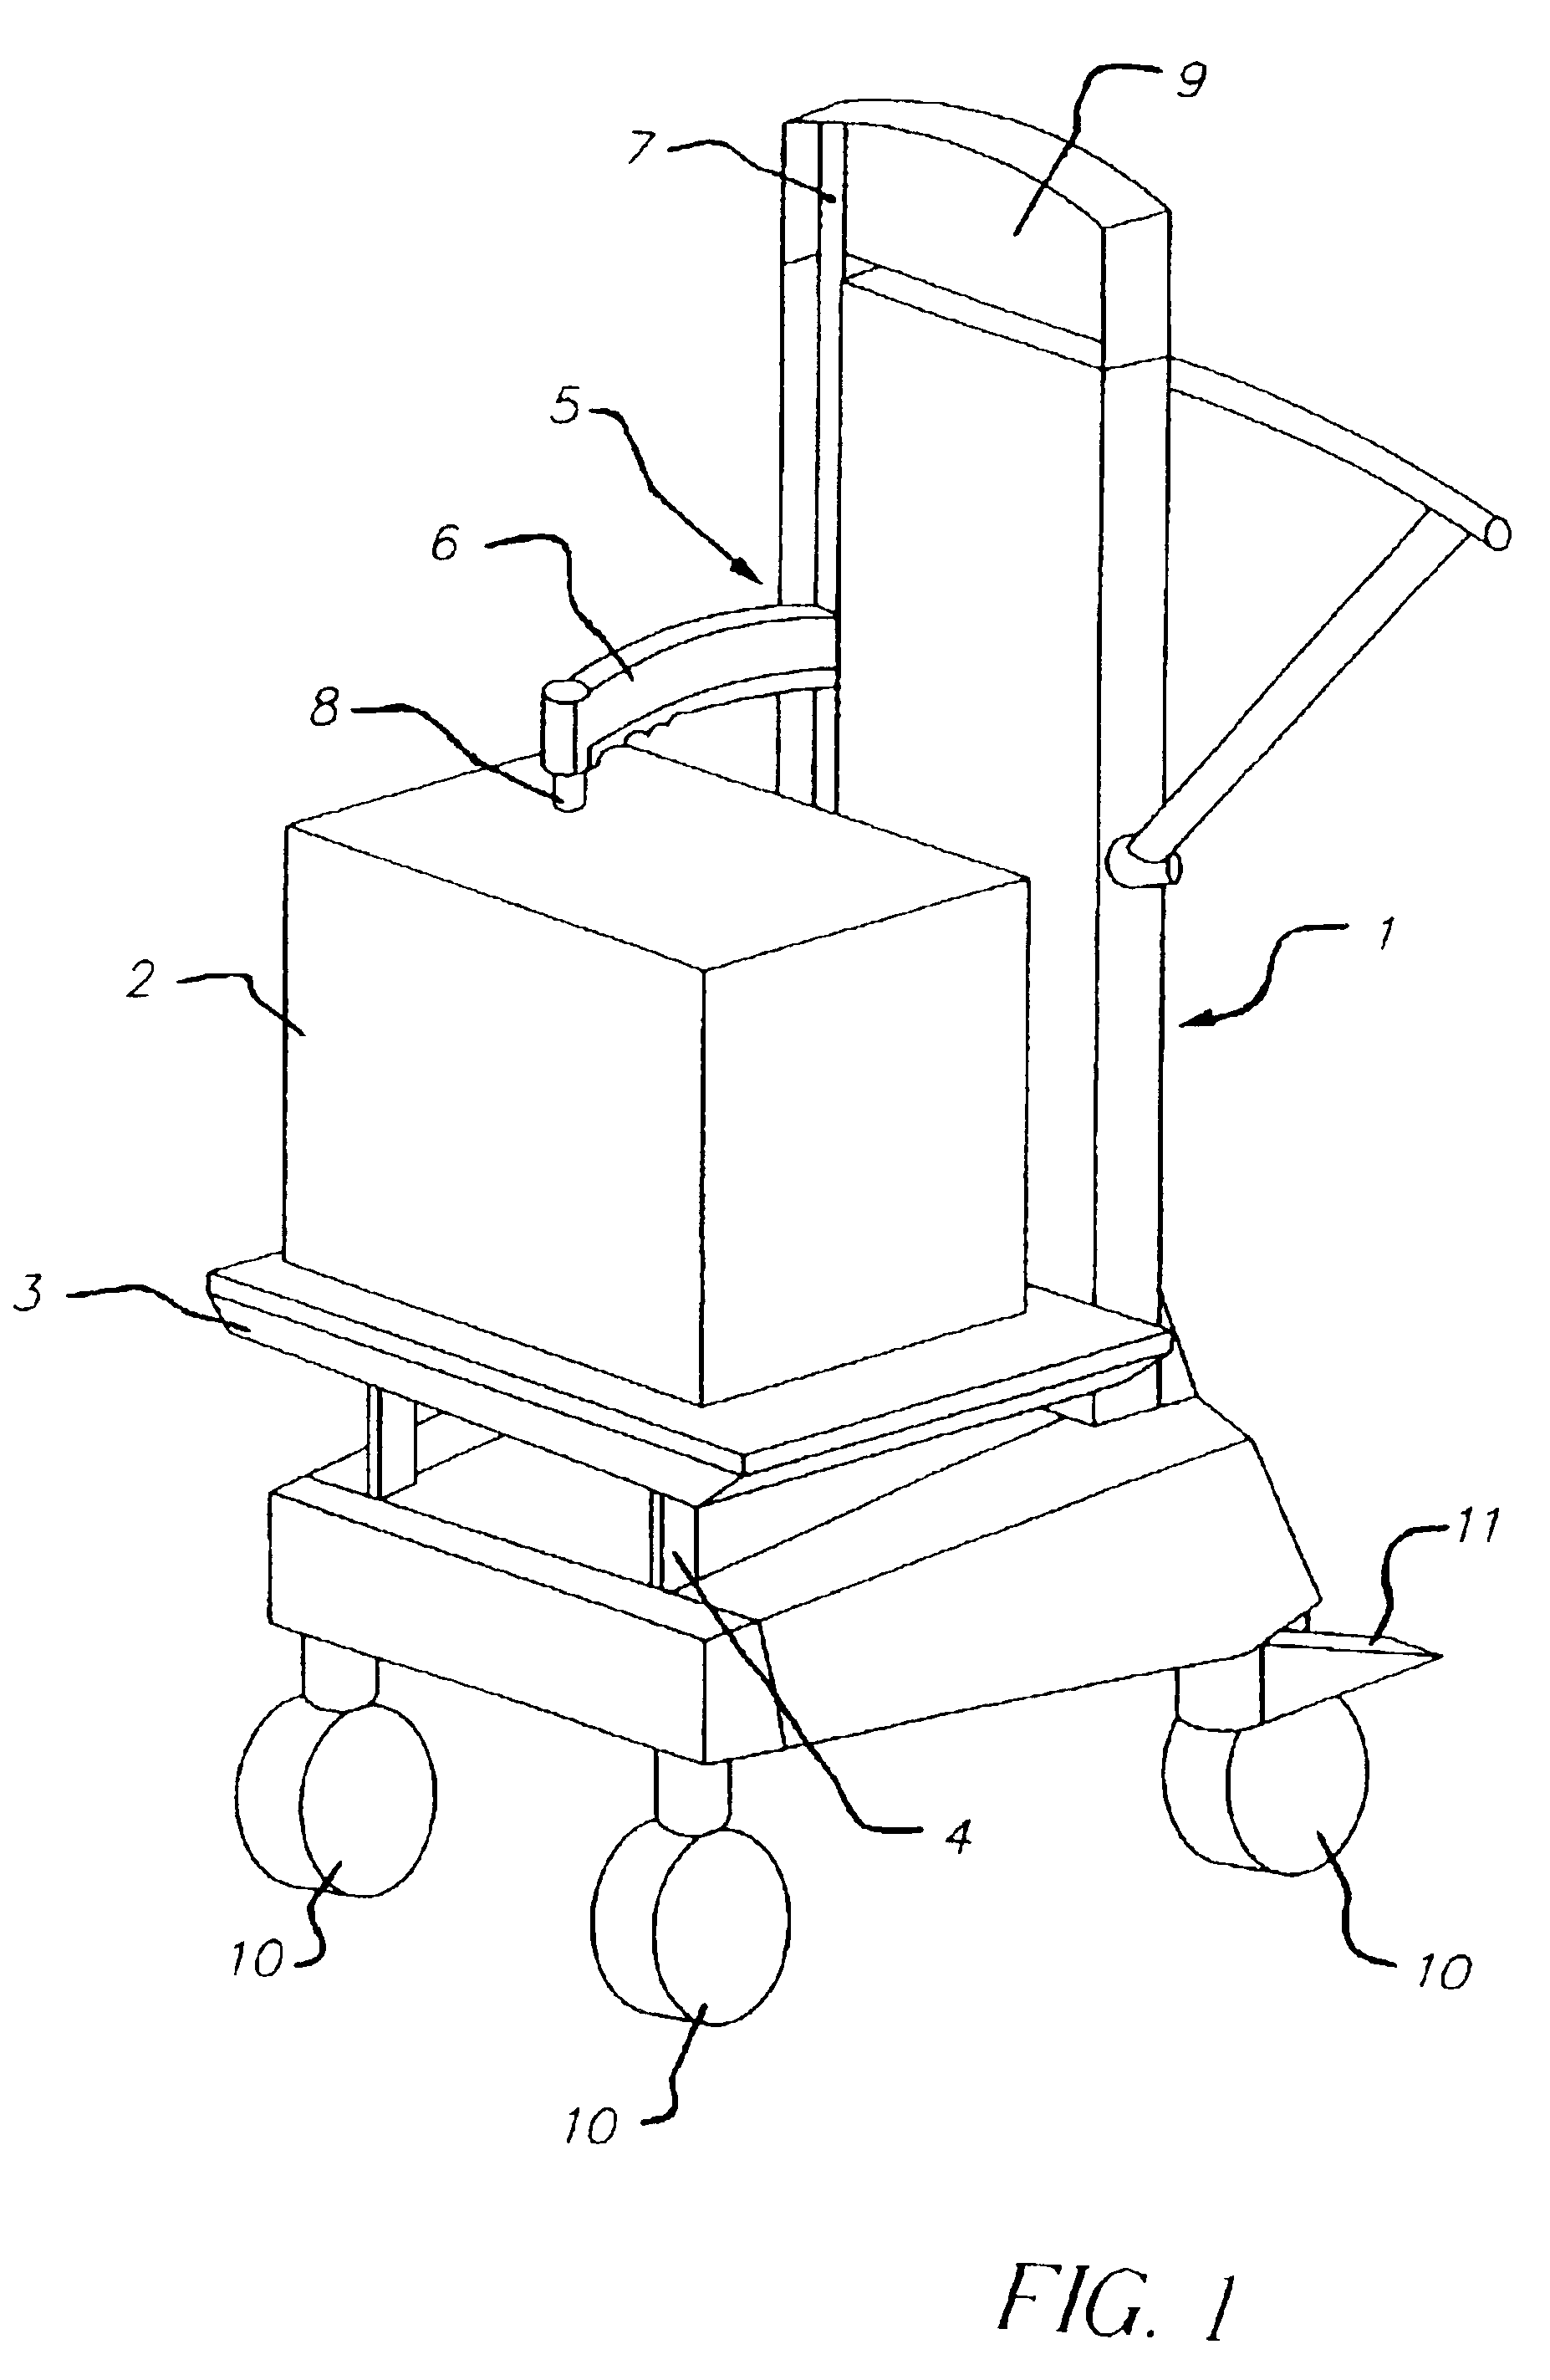 Hold down clamp for holding down sheet material